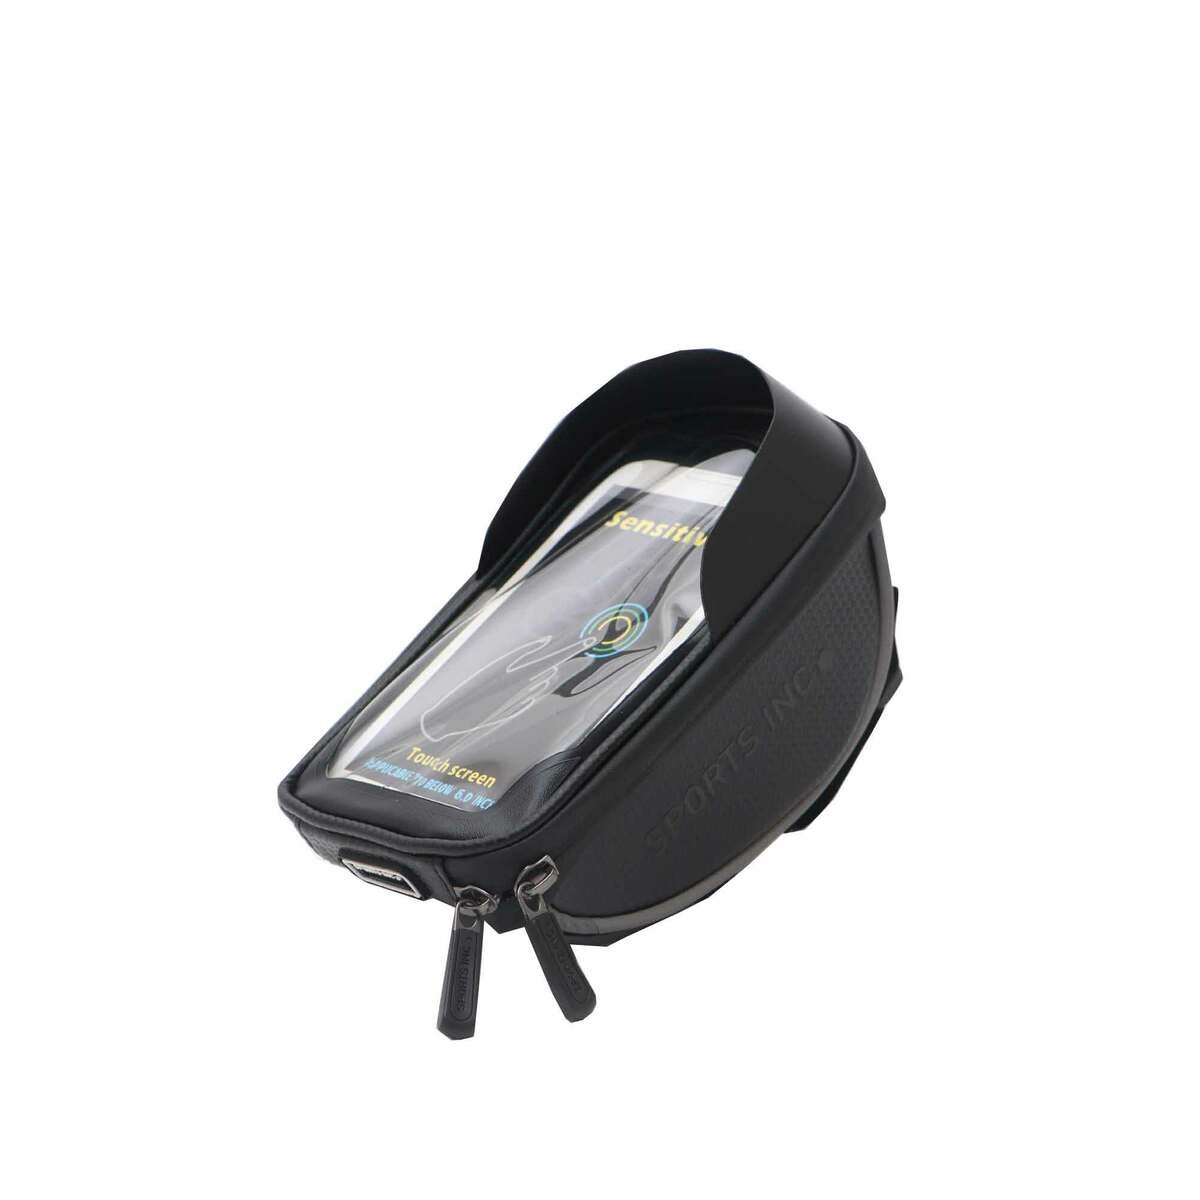 Sports INC Bicycle Frame Bag with Phone Holder 010-4BK